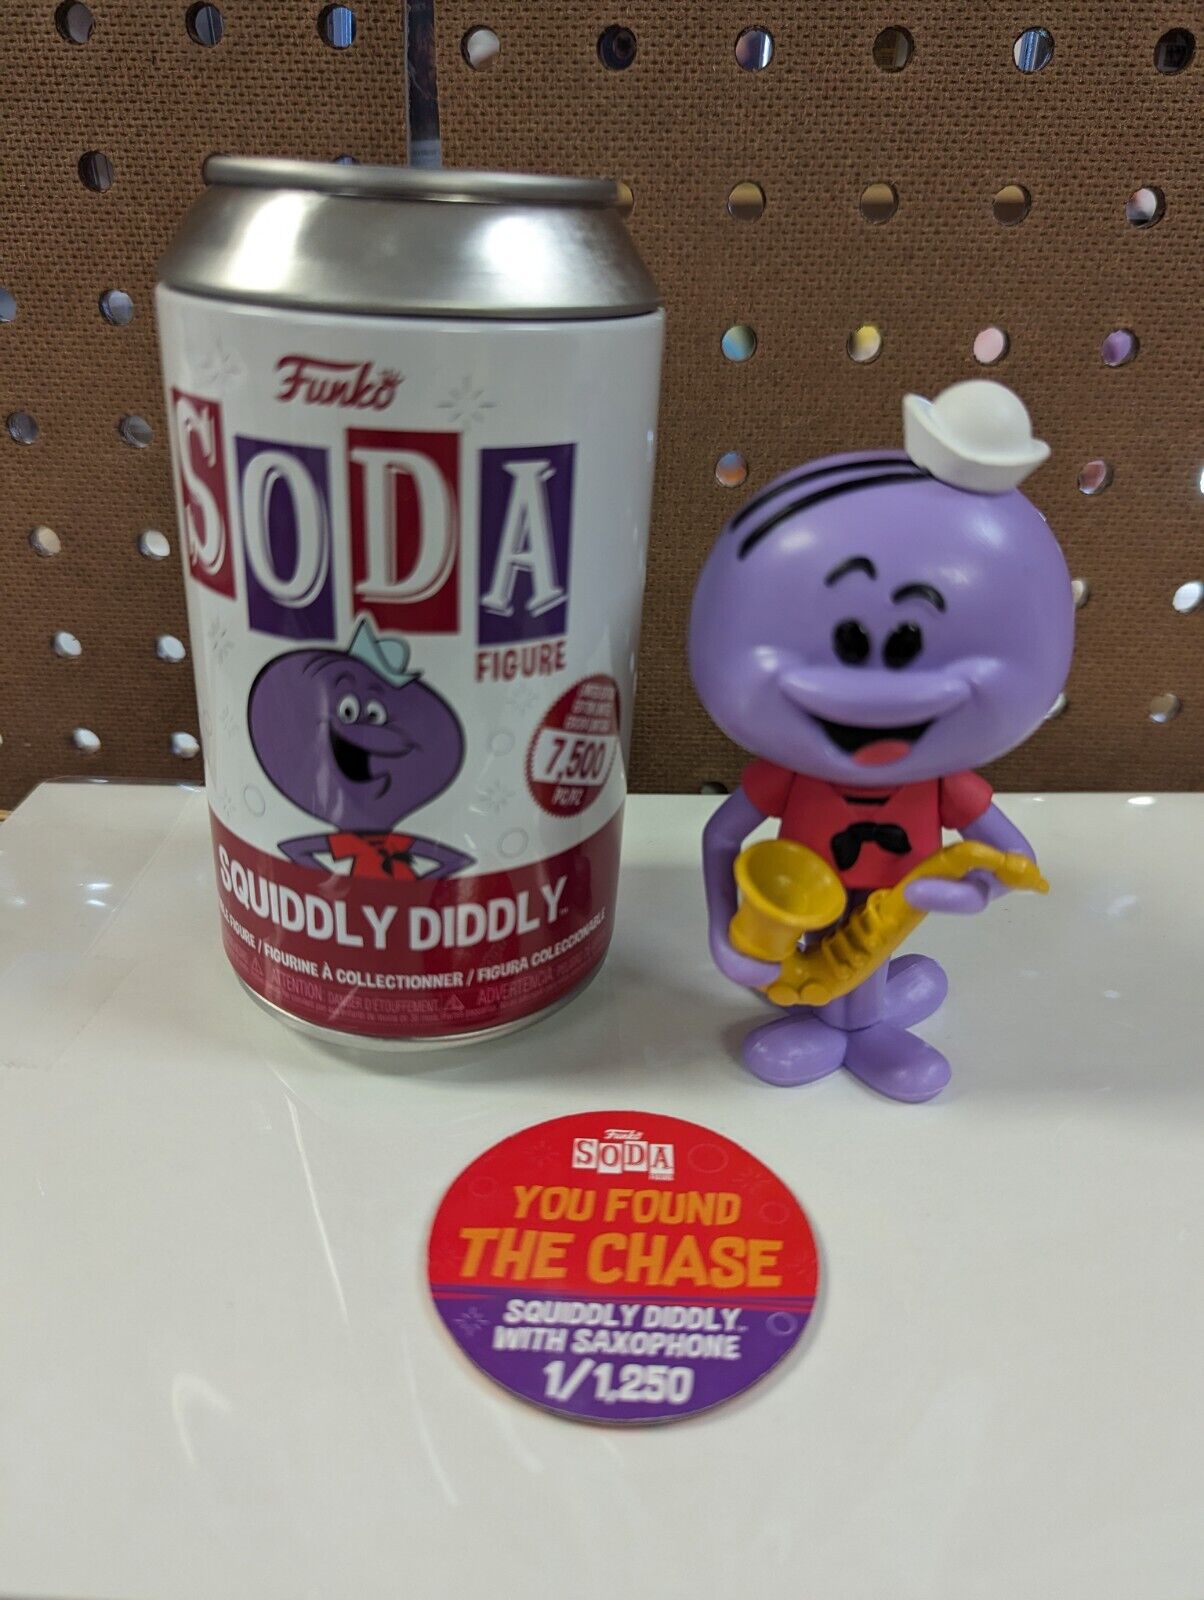 Funko Soda Squiddly Diddly With Saxophone 1/1250